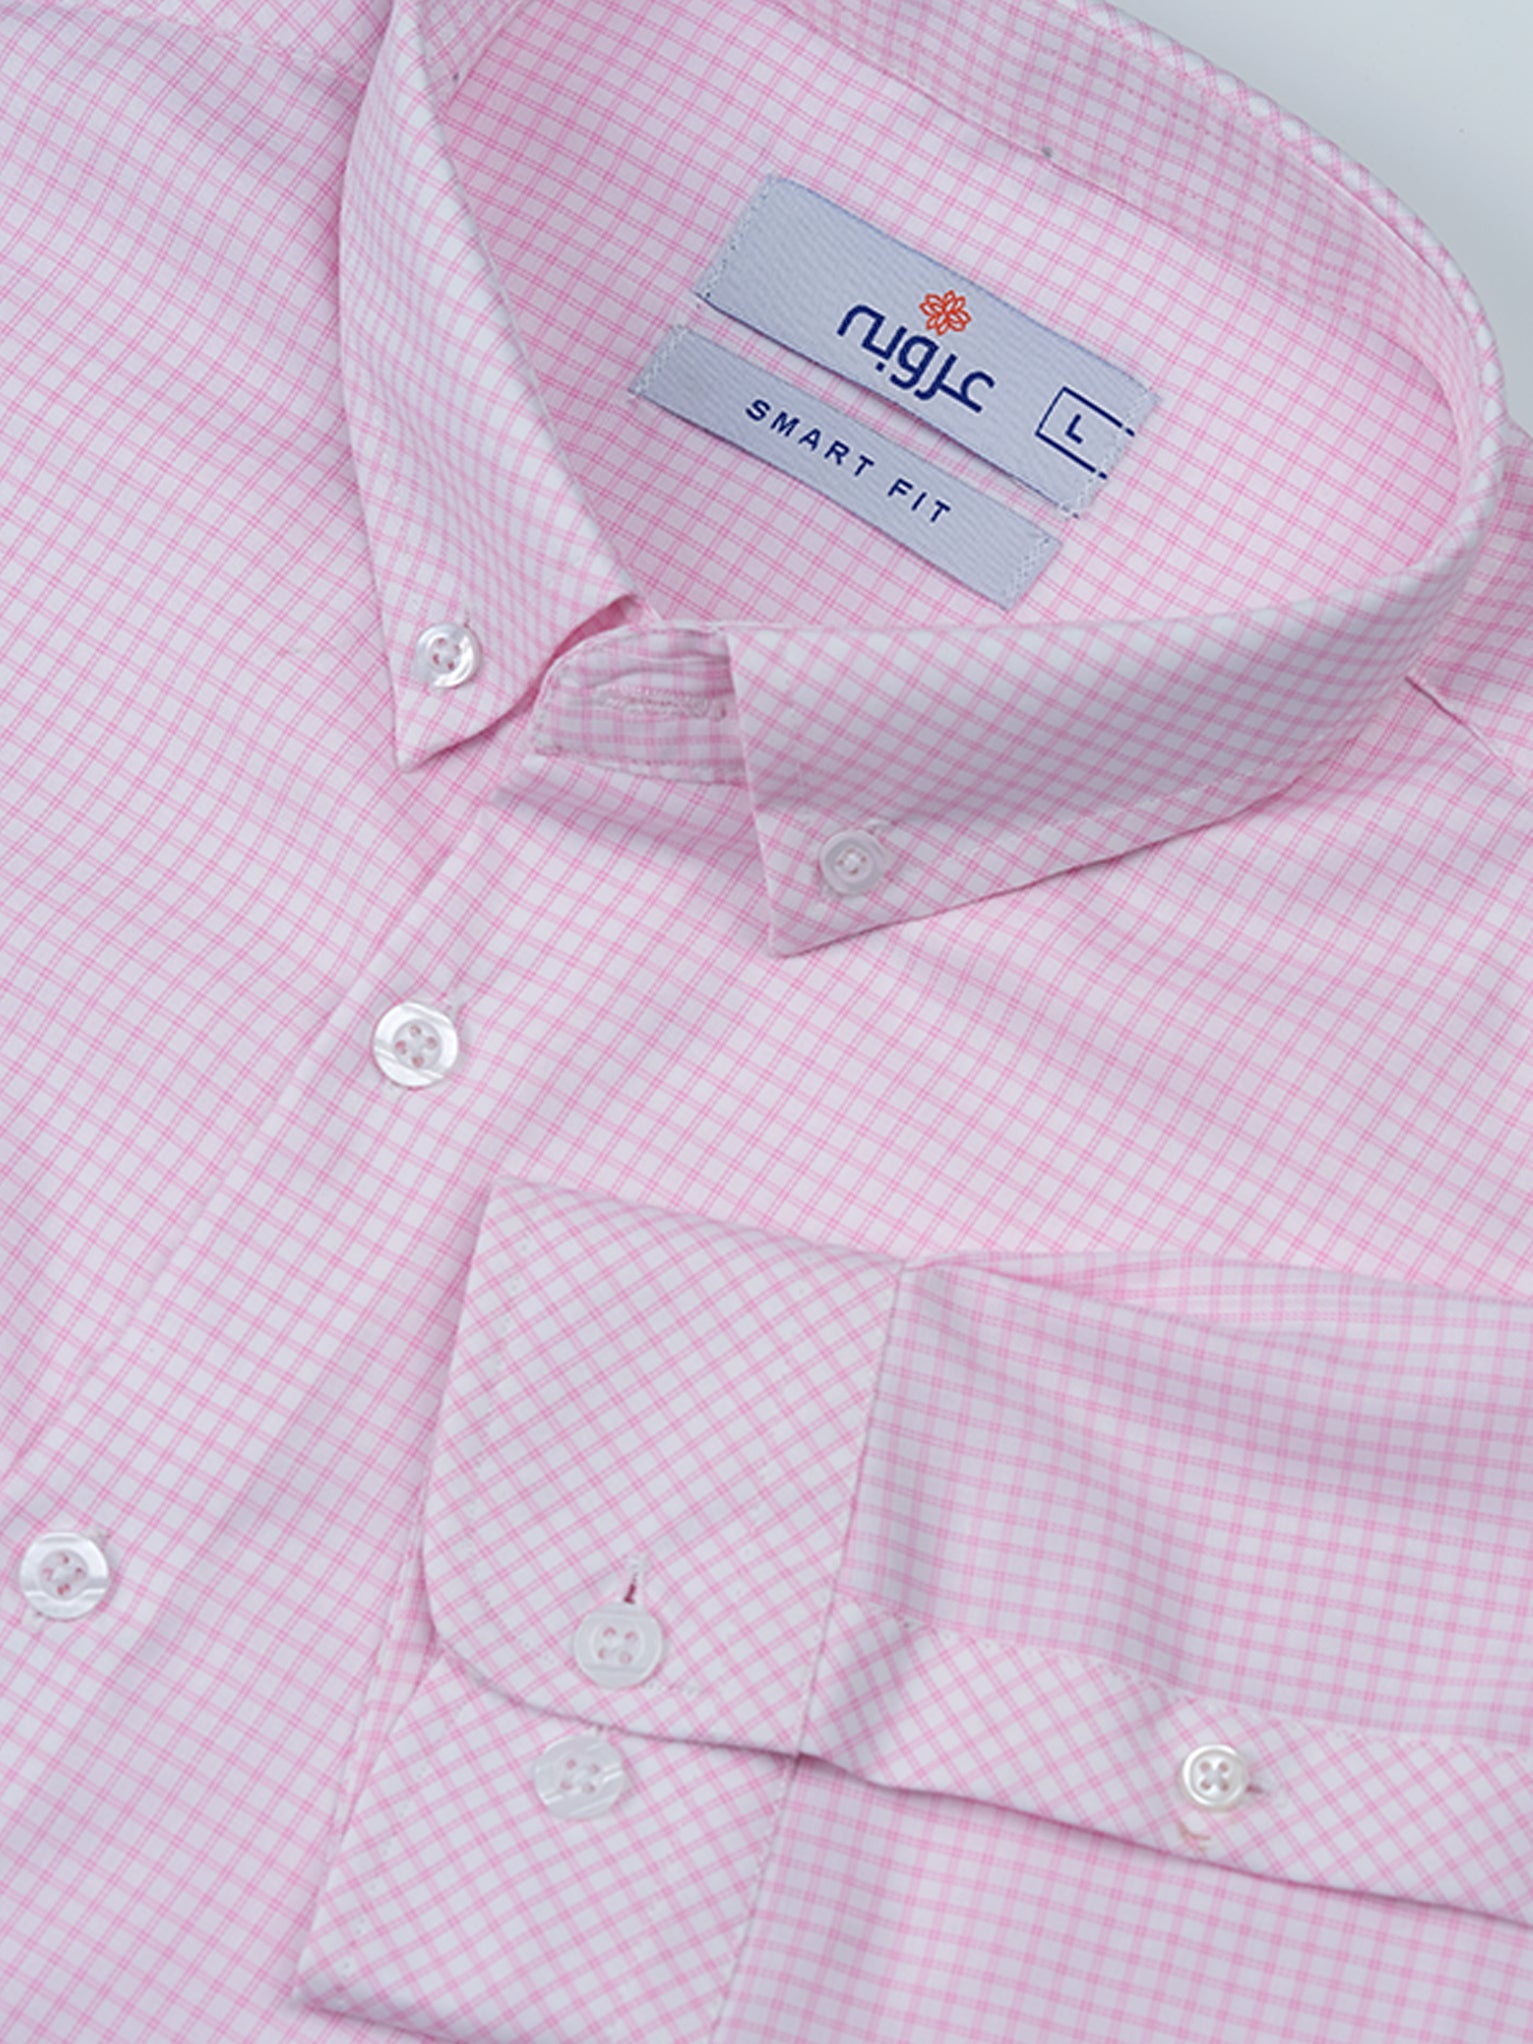 PINK-AND-WHITE-GINGHAM-SHIRT-FOR-MEN-3